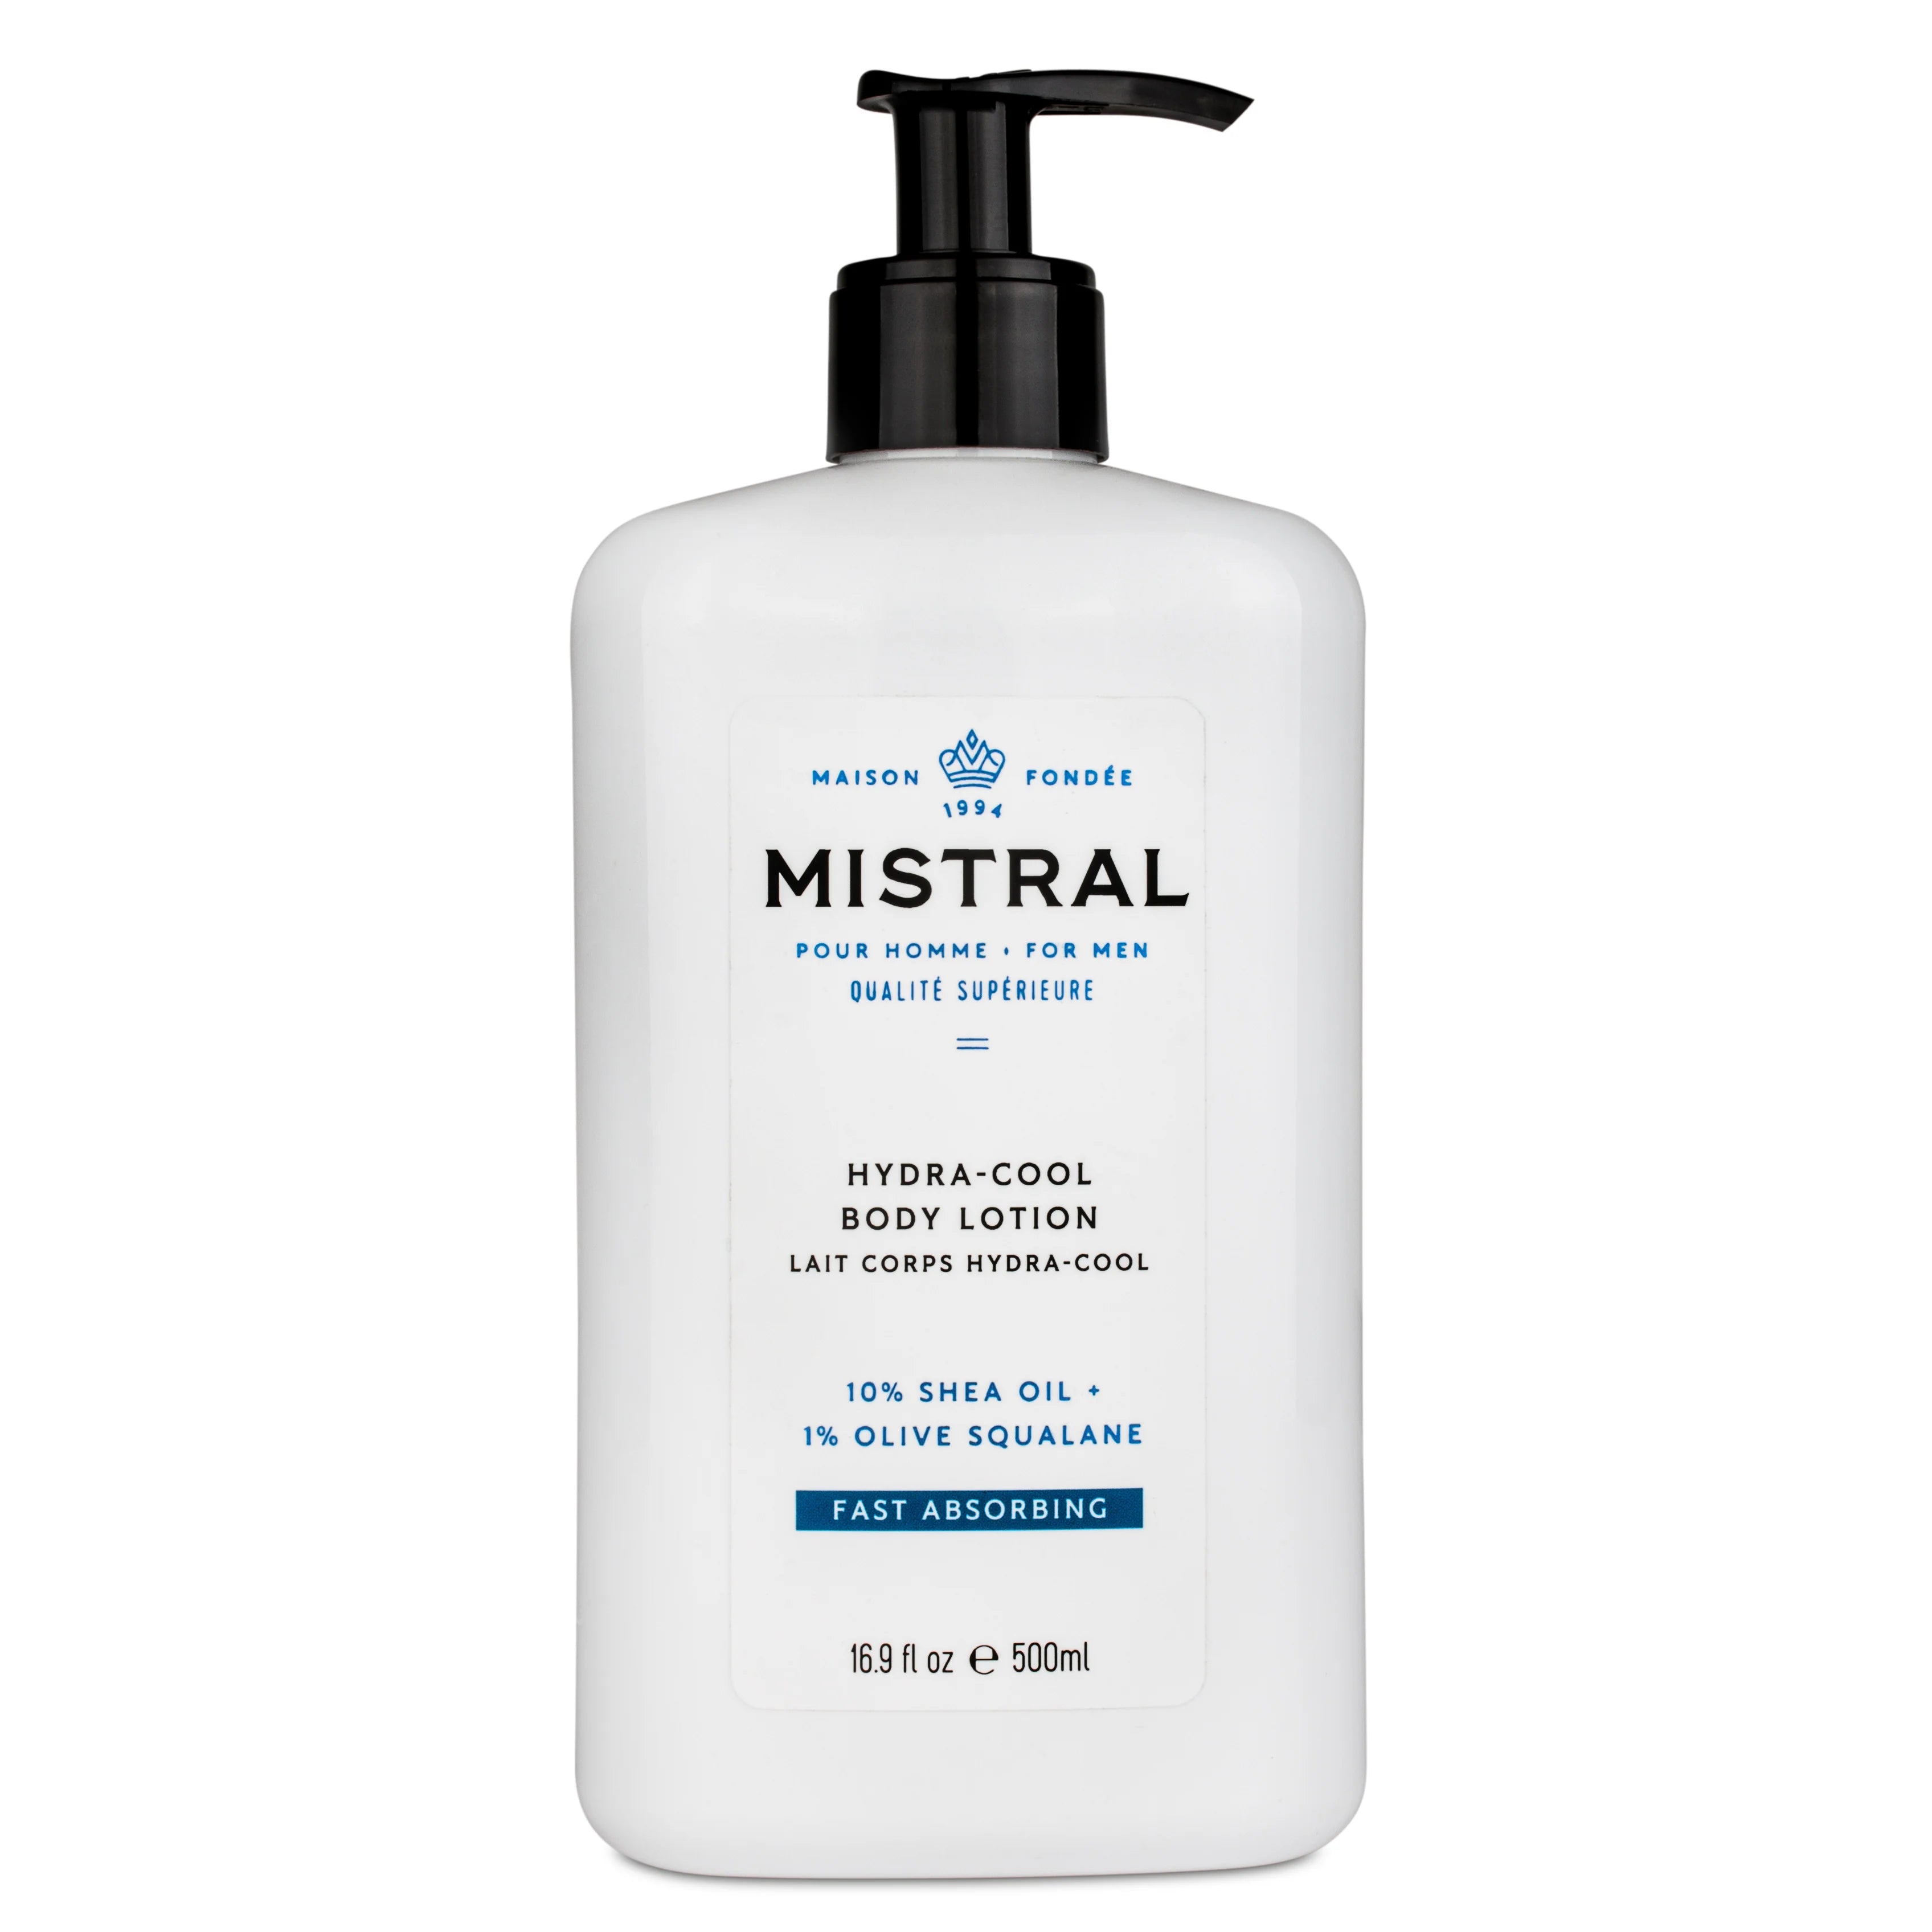 Mistral Hydra-Cool Body Lotion